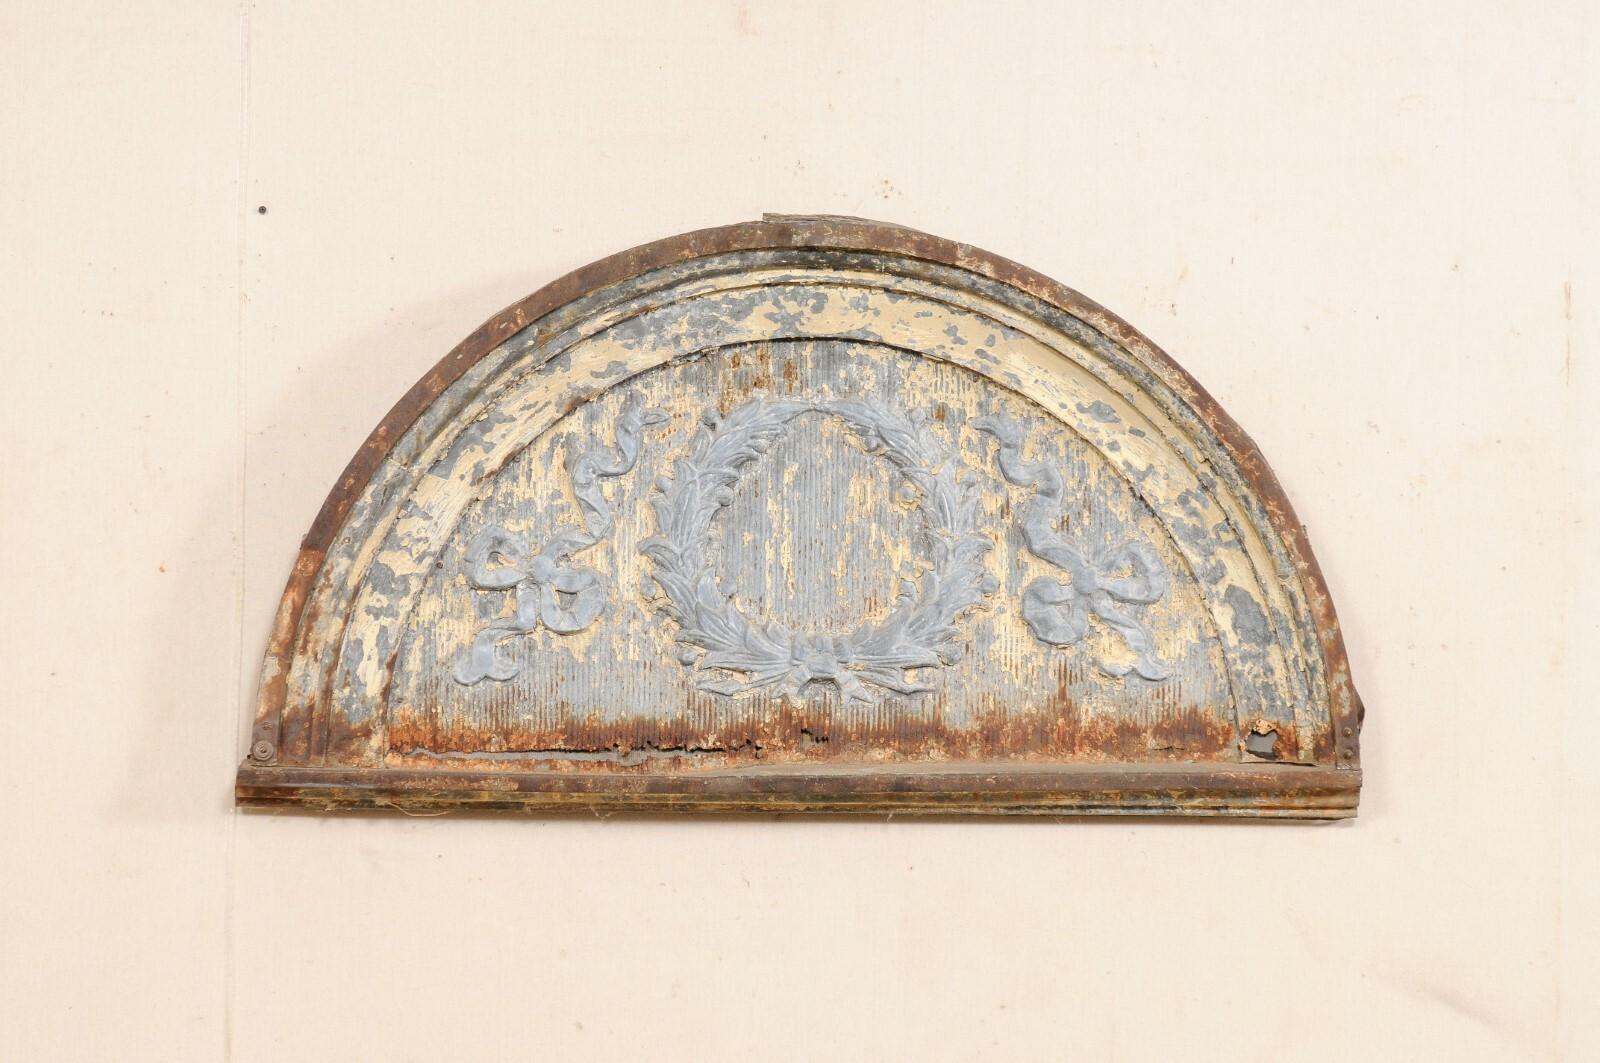 An American zinc arched pediment from the early 20th century. This antique architectural piece from American has been designed with Neoclassical inspired wreath and ribbon bow-ties within its center and has a half-moon, arched shape with flattened